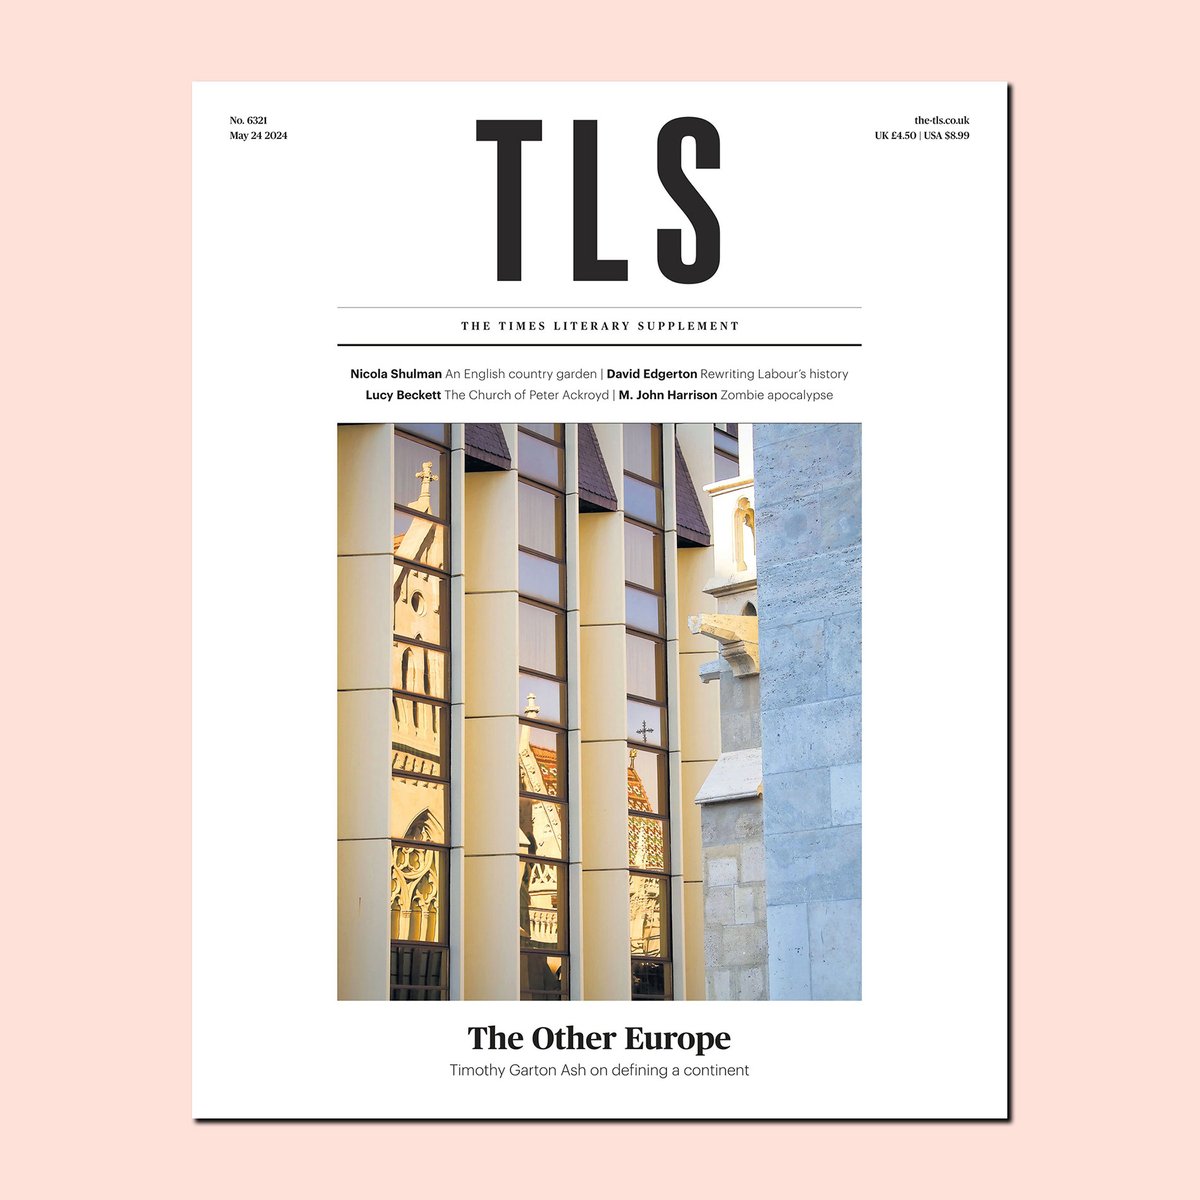 This week’s @TheTLS, featuring @fromTGA on Central Europe; @DEHEdgerton on Labour; @sophieolive on Sonia Delaunay; @mjohnharrison on Anne de Marcken; @KatyaTaylor on Miranda July; a @hayfestival sport symposium; @katebrownMIT on Russian food – and more